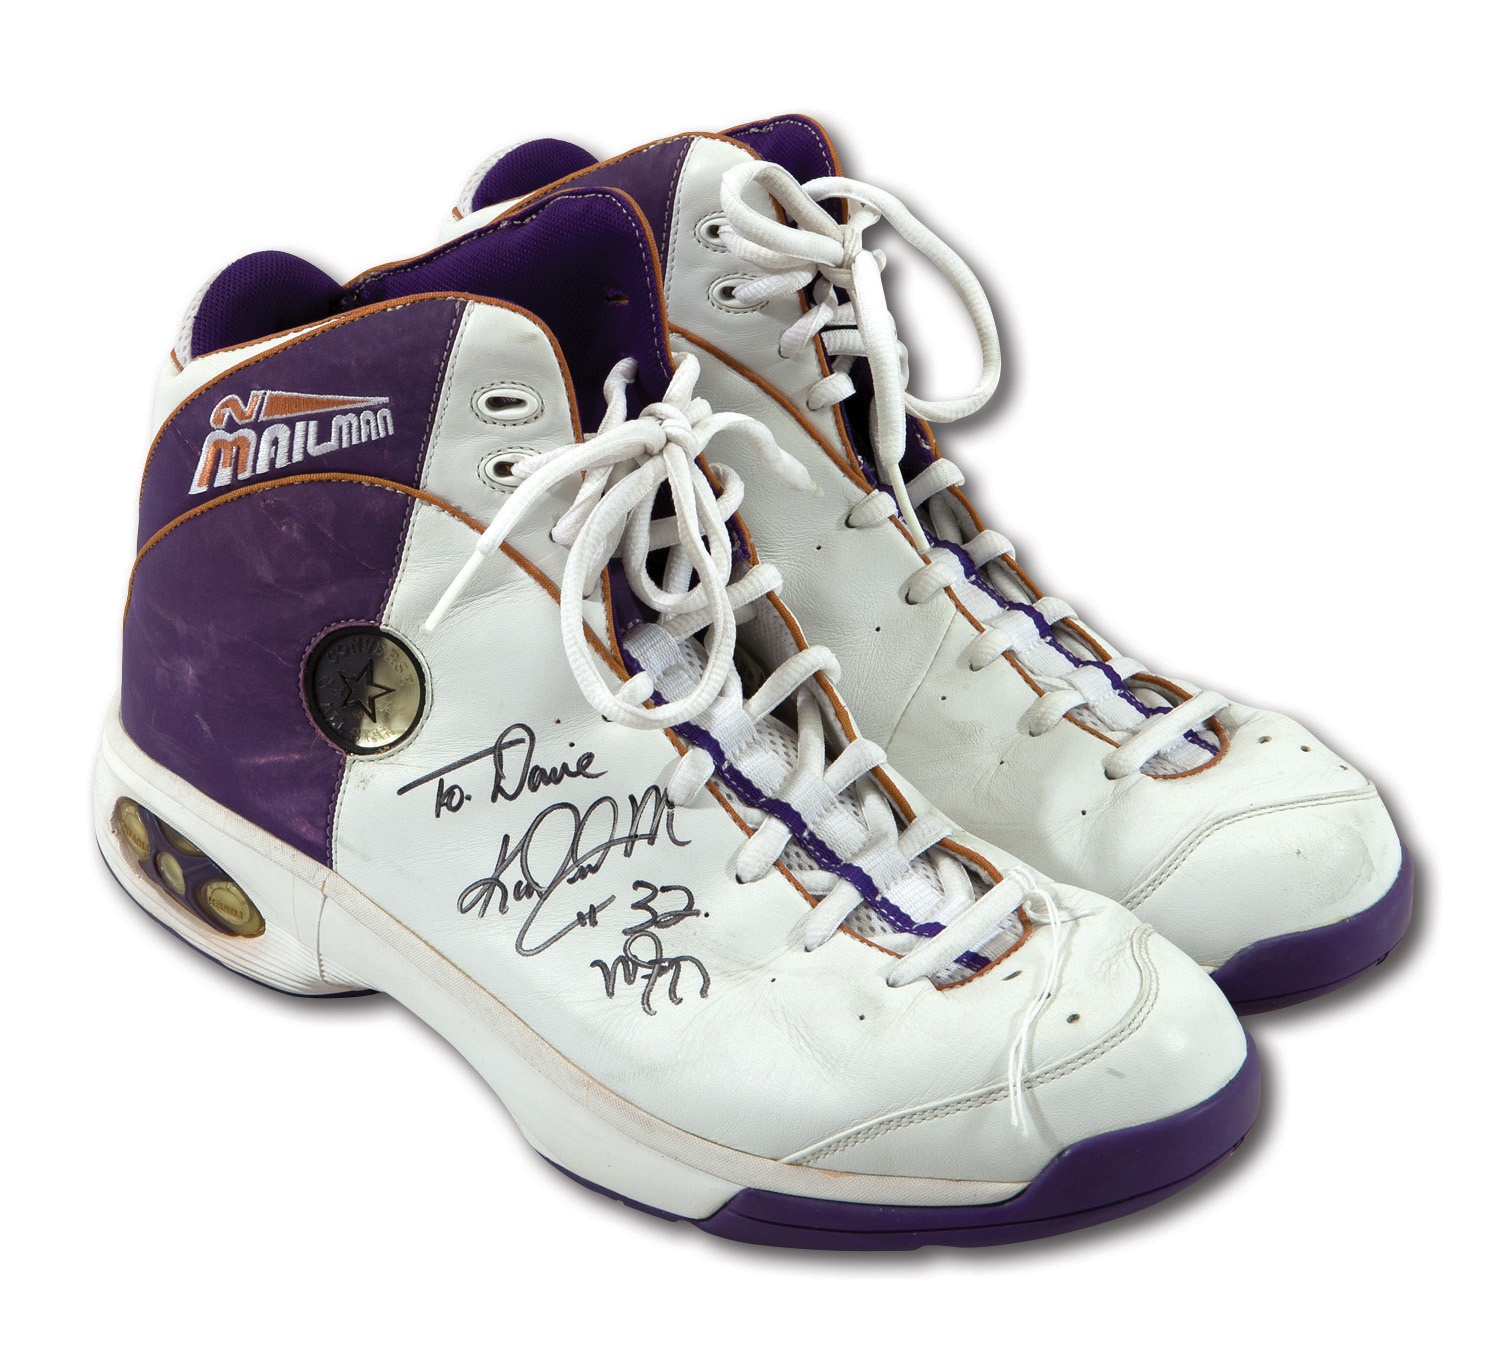 Karl Malone Signed Limited Edition 1999-2000 Authentic Champion